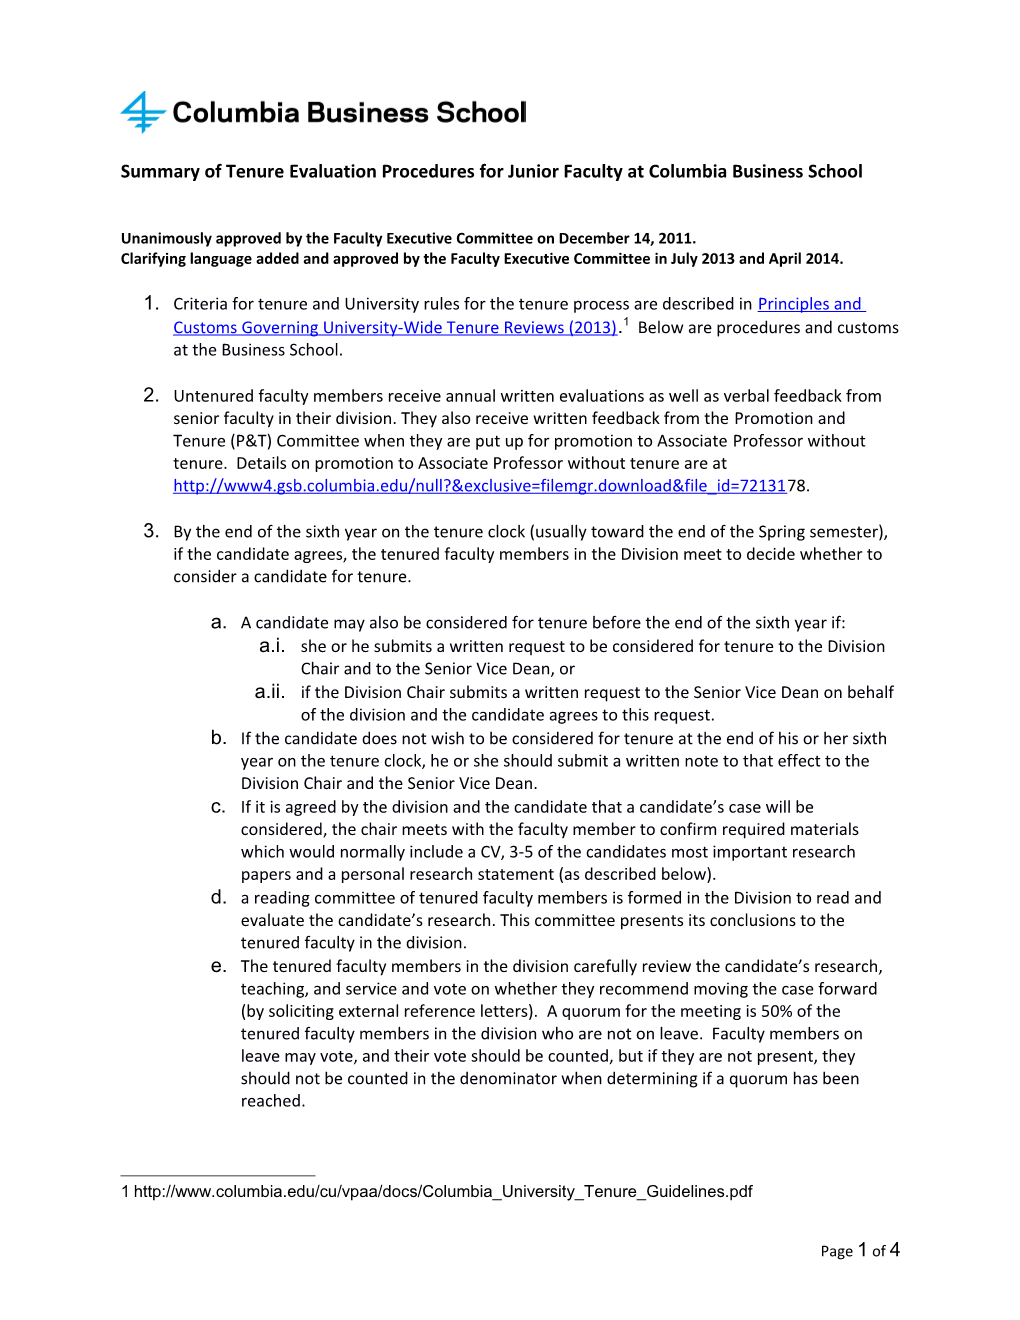 Summary of Tenure Evaluation Procedures for Junior Faculty at Columbia Business School